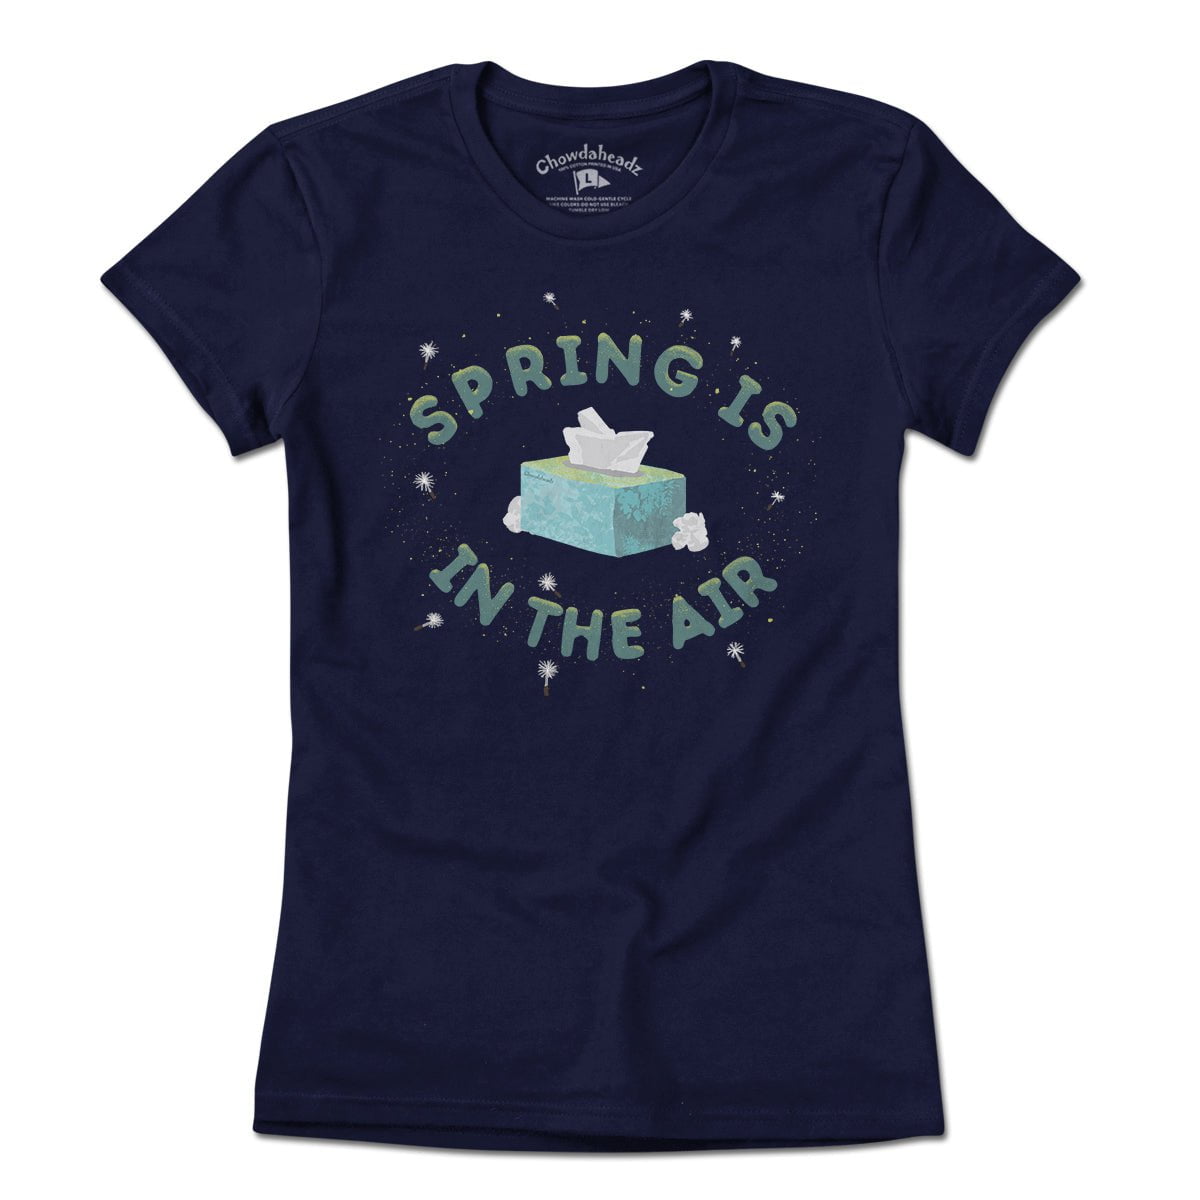 Spring Is In The Air T-Shirt - Chowdaheadz